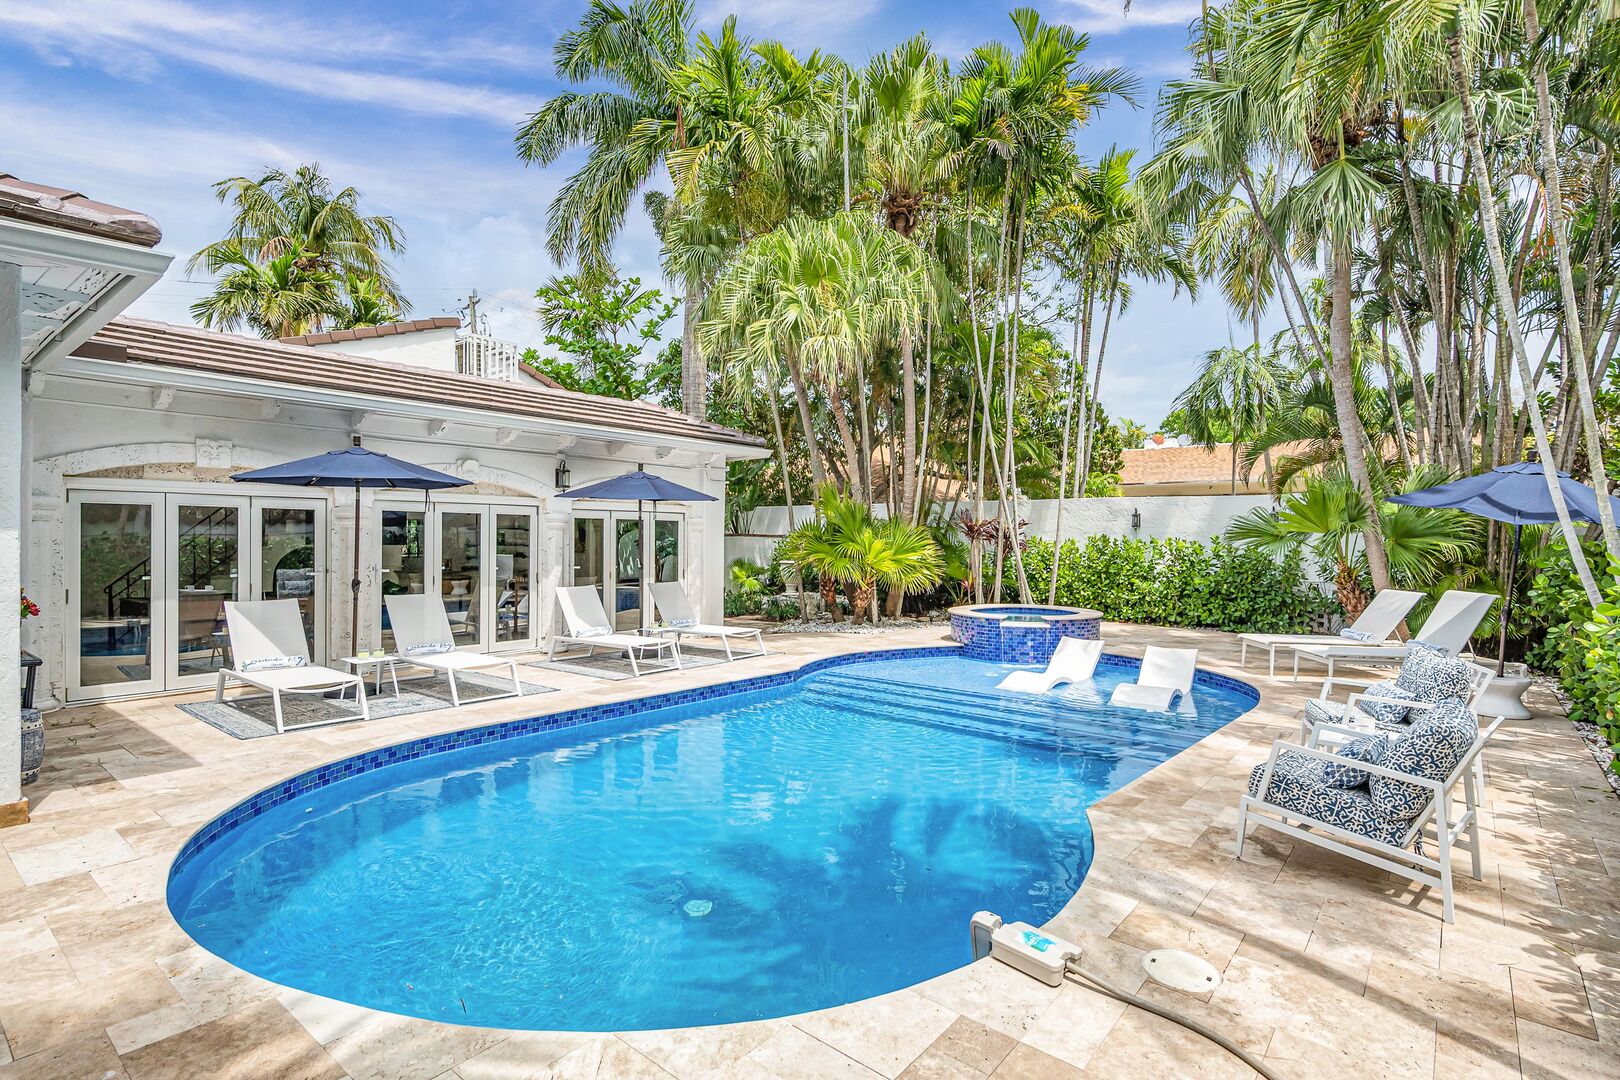 The heated pool and hot tub in the lush tropical garden with access to the covered patio, featuring a pool table and a bar.